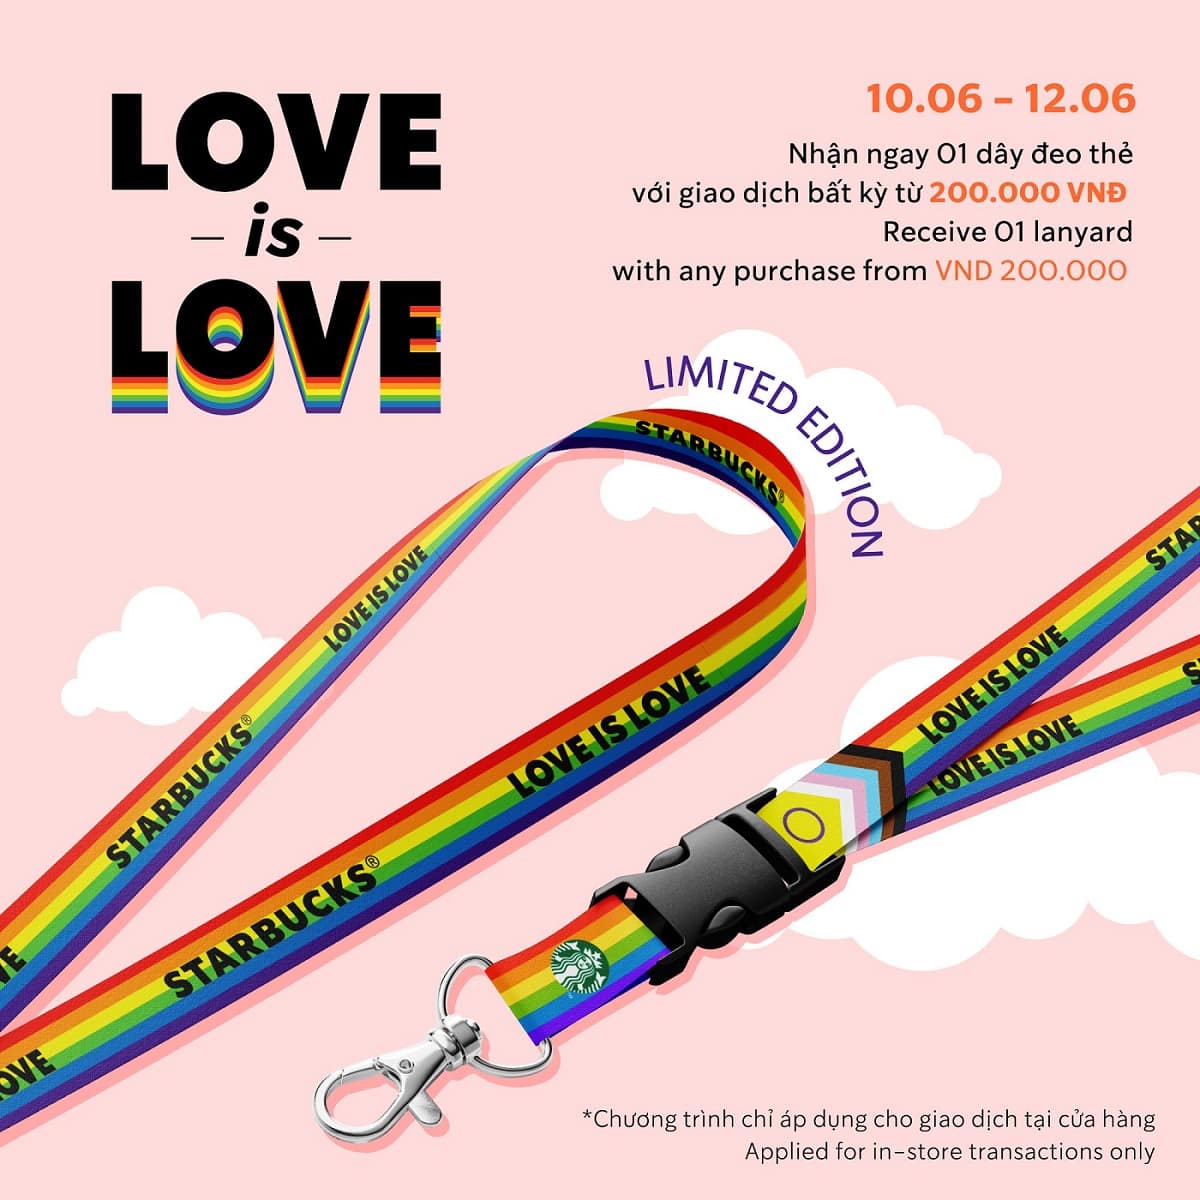 DO YOU OWN A “LOVE is LOVE” LANYARD YET?